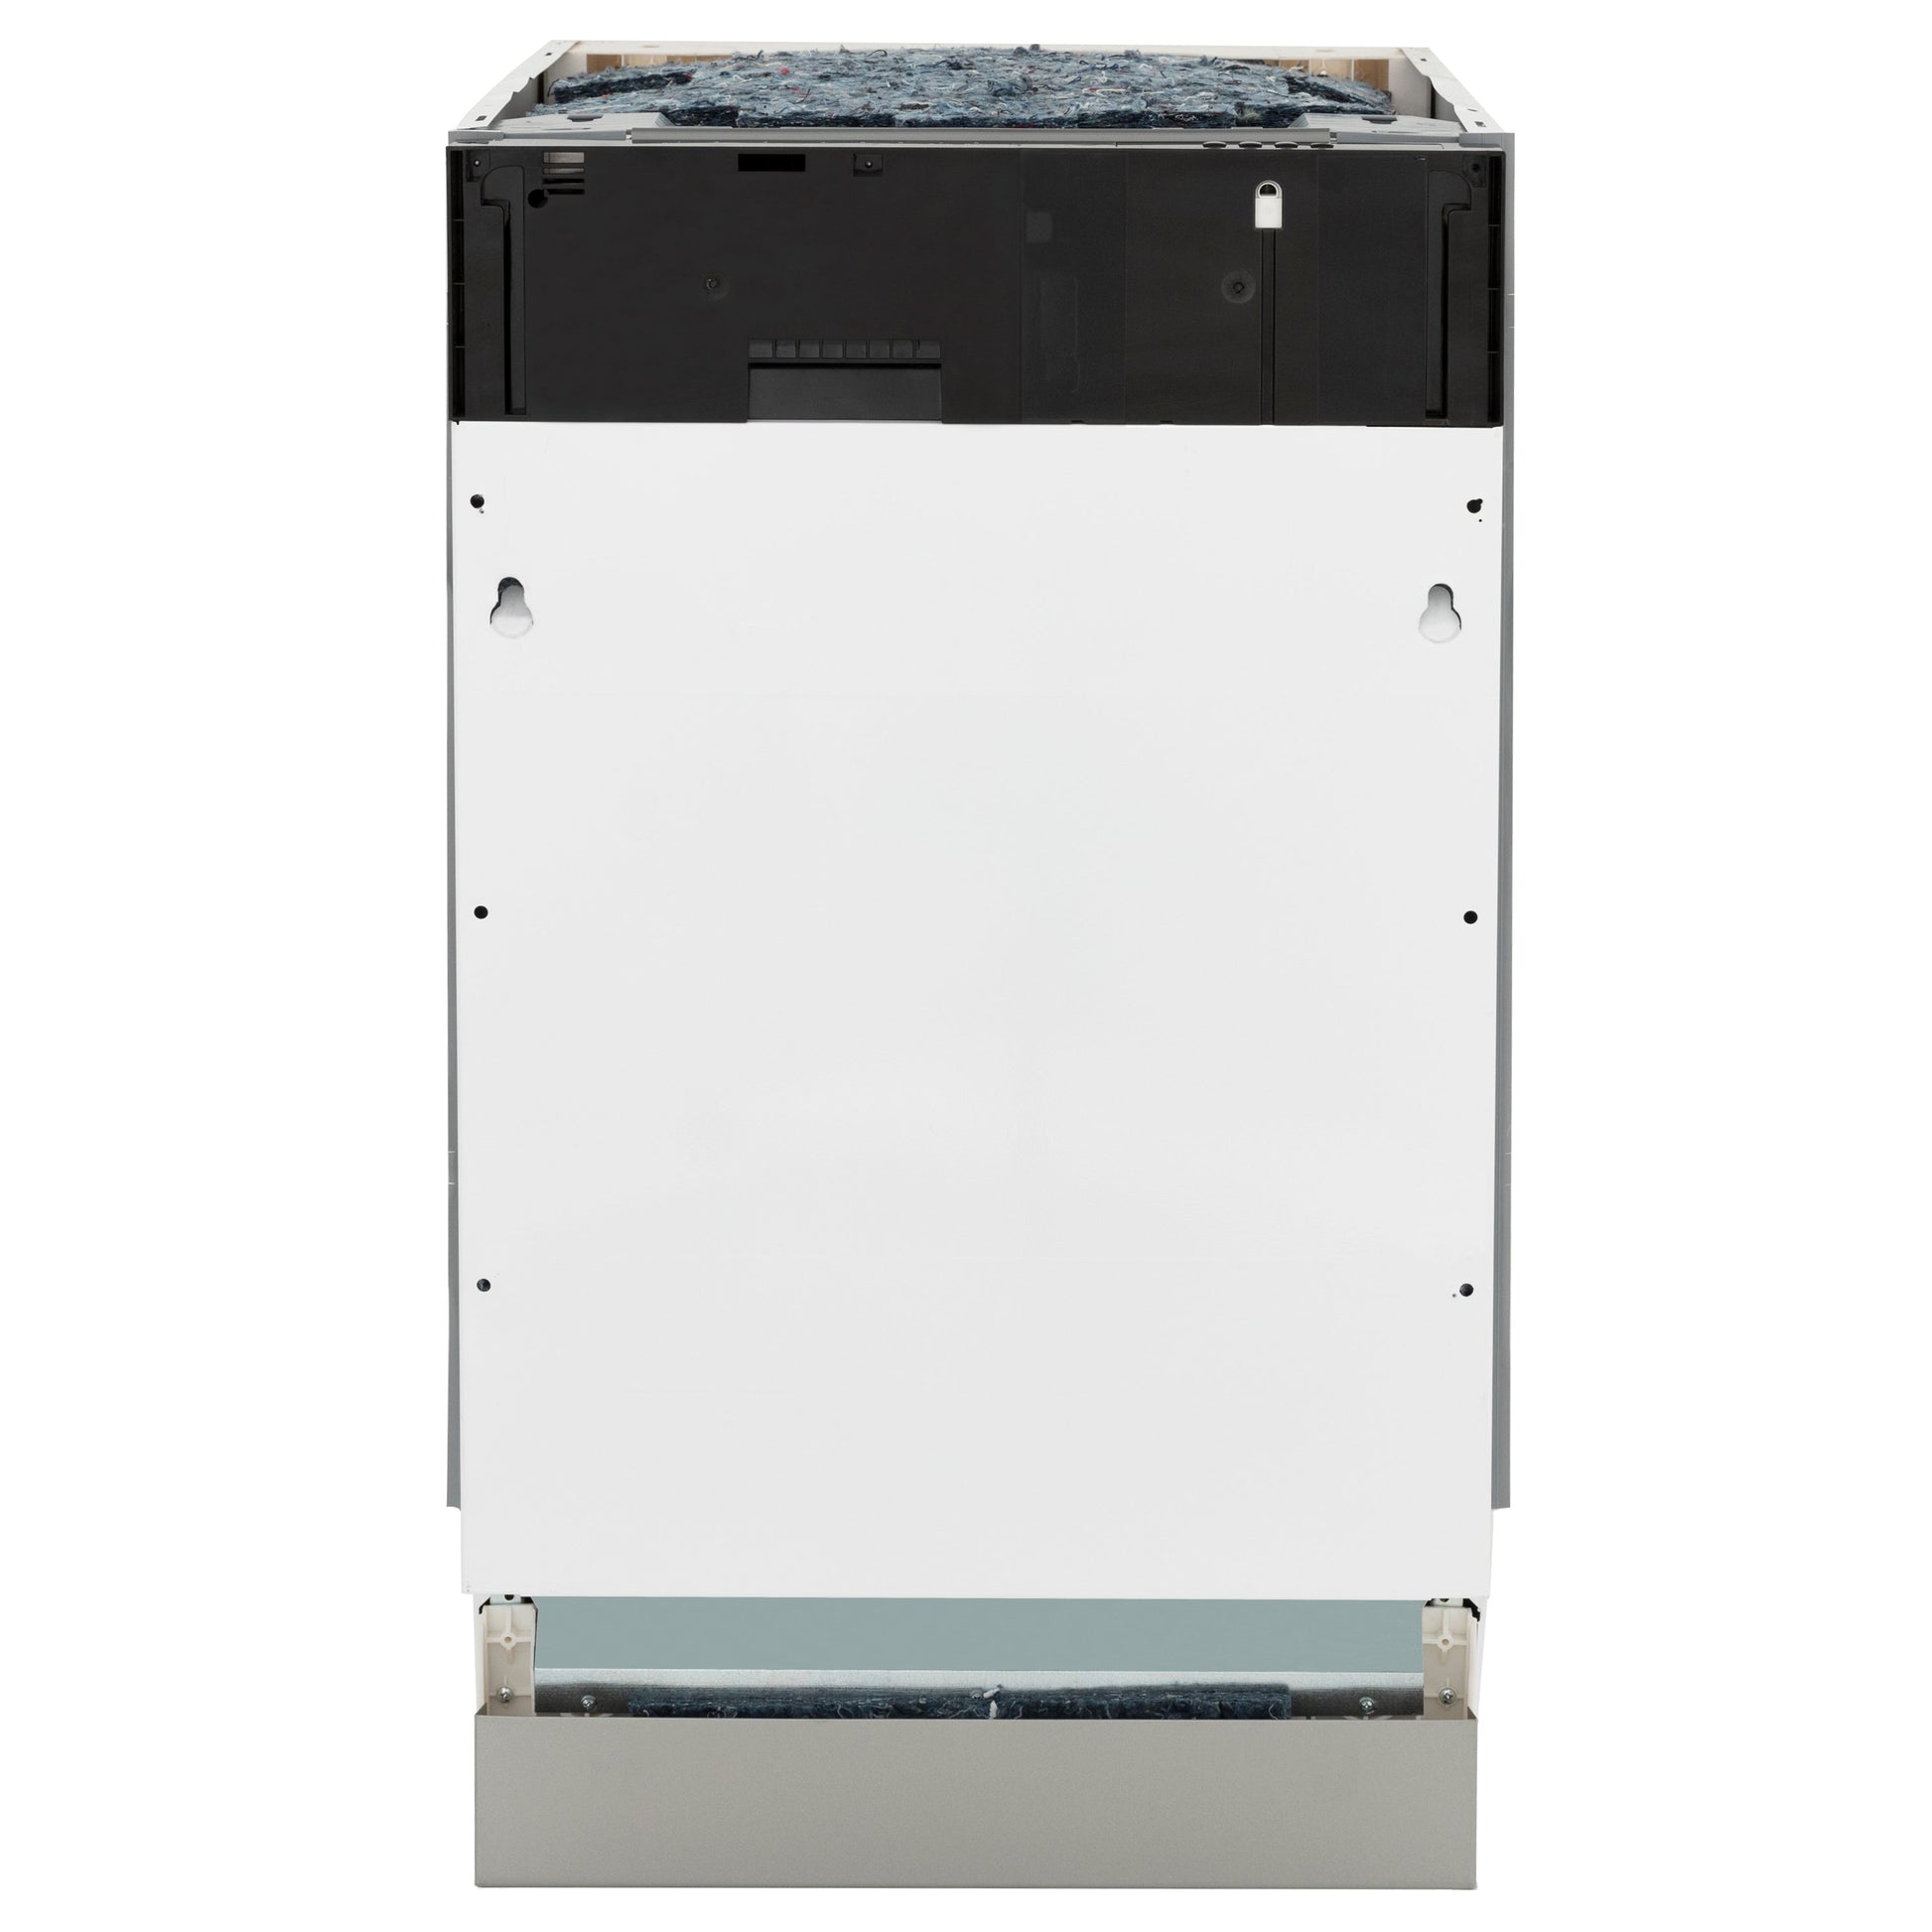 ZLINE 18" Tallac Series 3rd Rack Top Control Dishwasher - Custom Panel Ready, Stainless Steel Tub